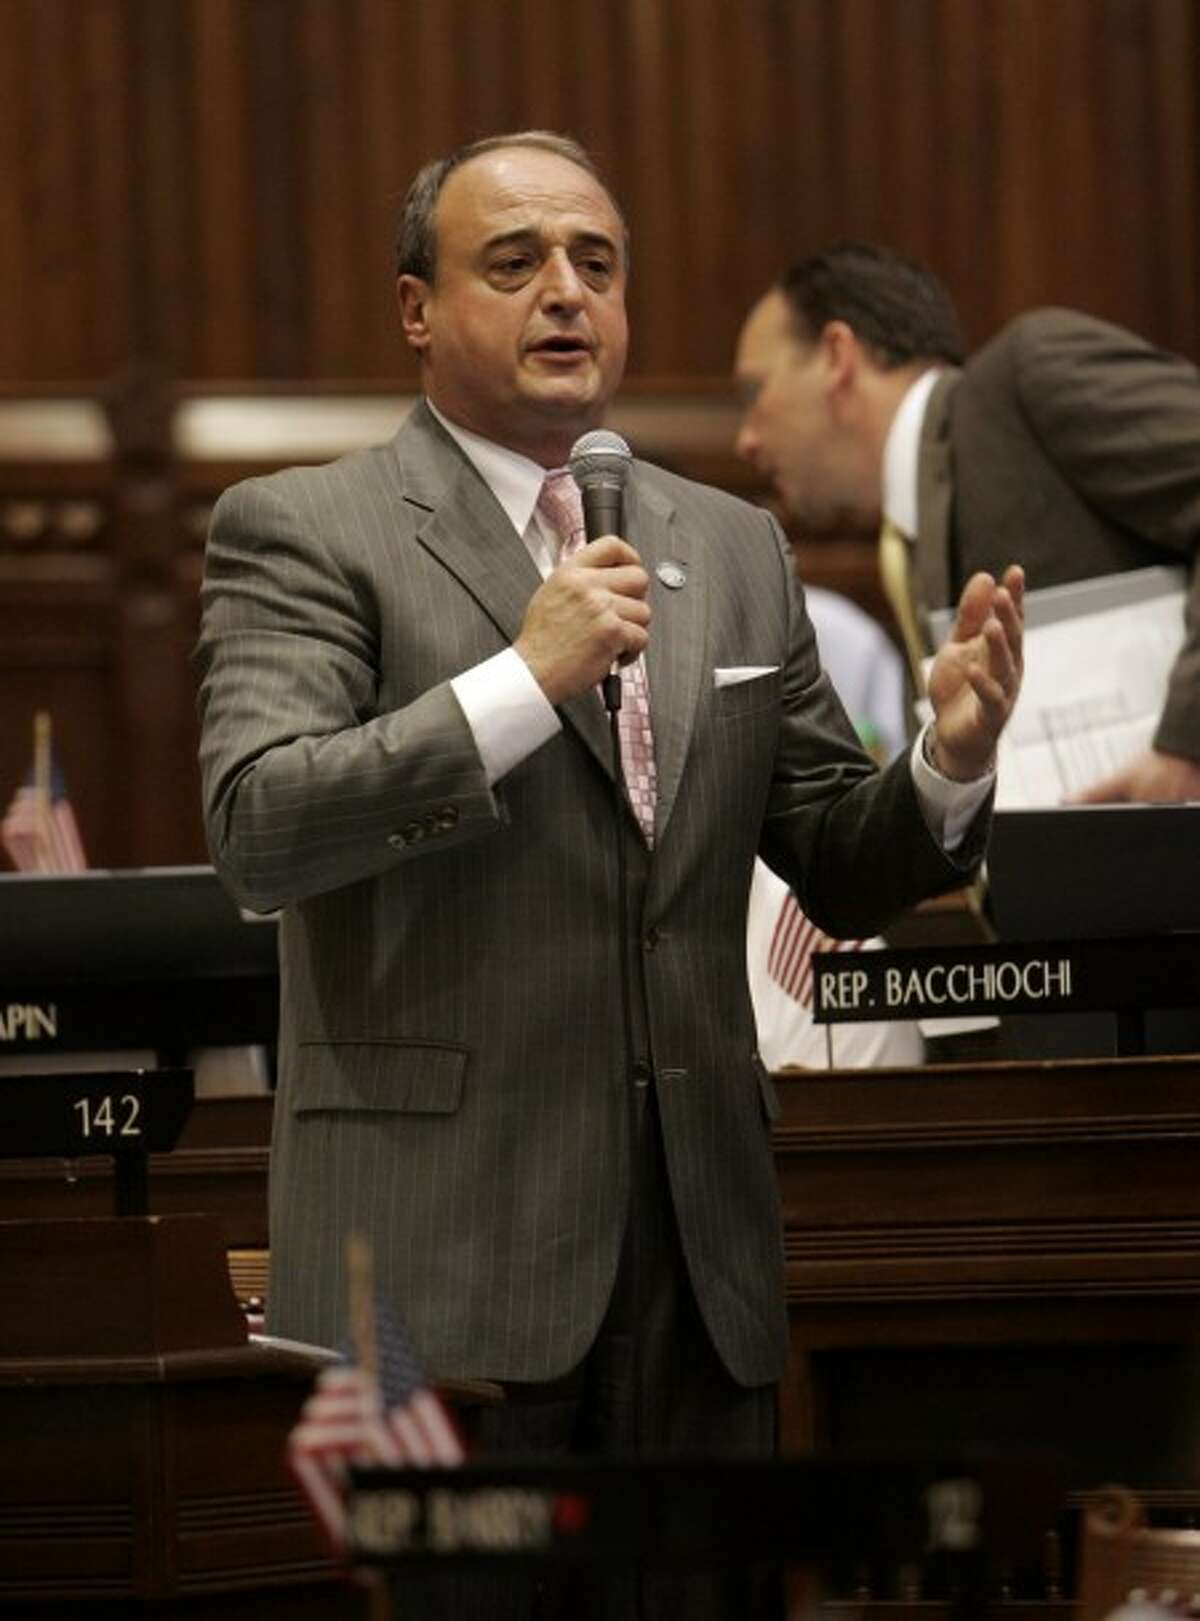 Connecticut House Minority Leader Rep. Lawrence Cafero, R-Norwalk, speaks during debate in the Hall of the House at the state Capitol in Hartford, Conn., Friday, May 22, 2009. The House was debating proposed legislation to mitigate the state''s looming budget deficit. (AP Photo/Bob Child)